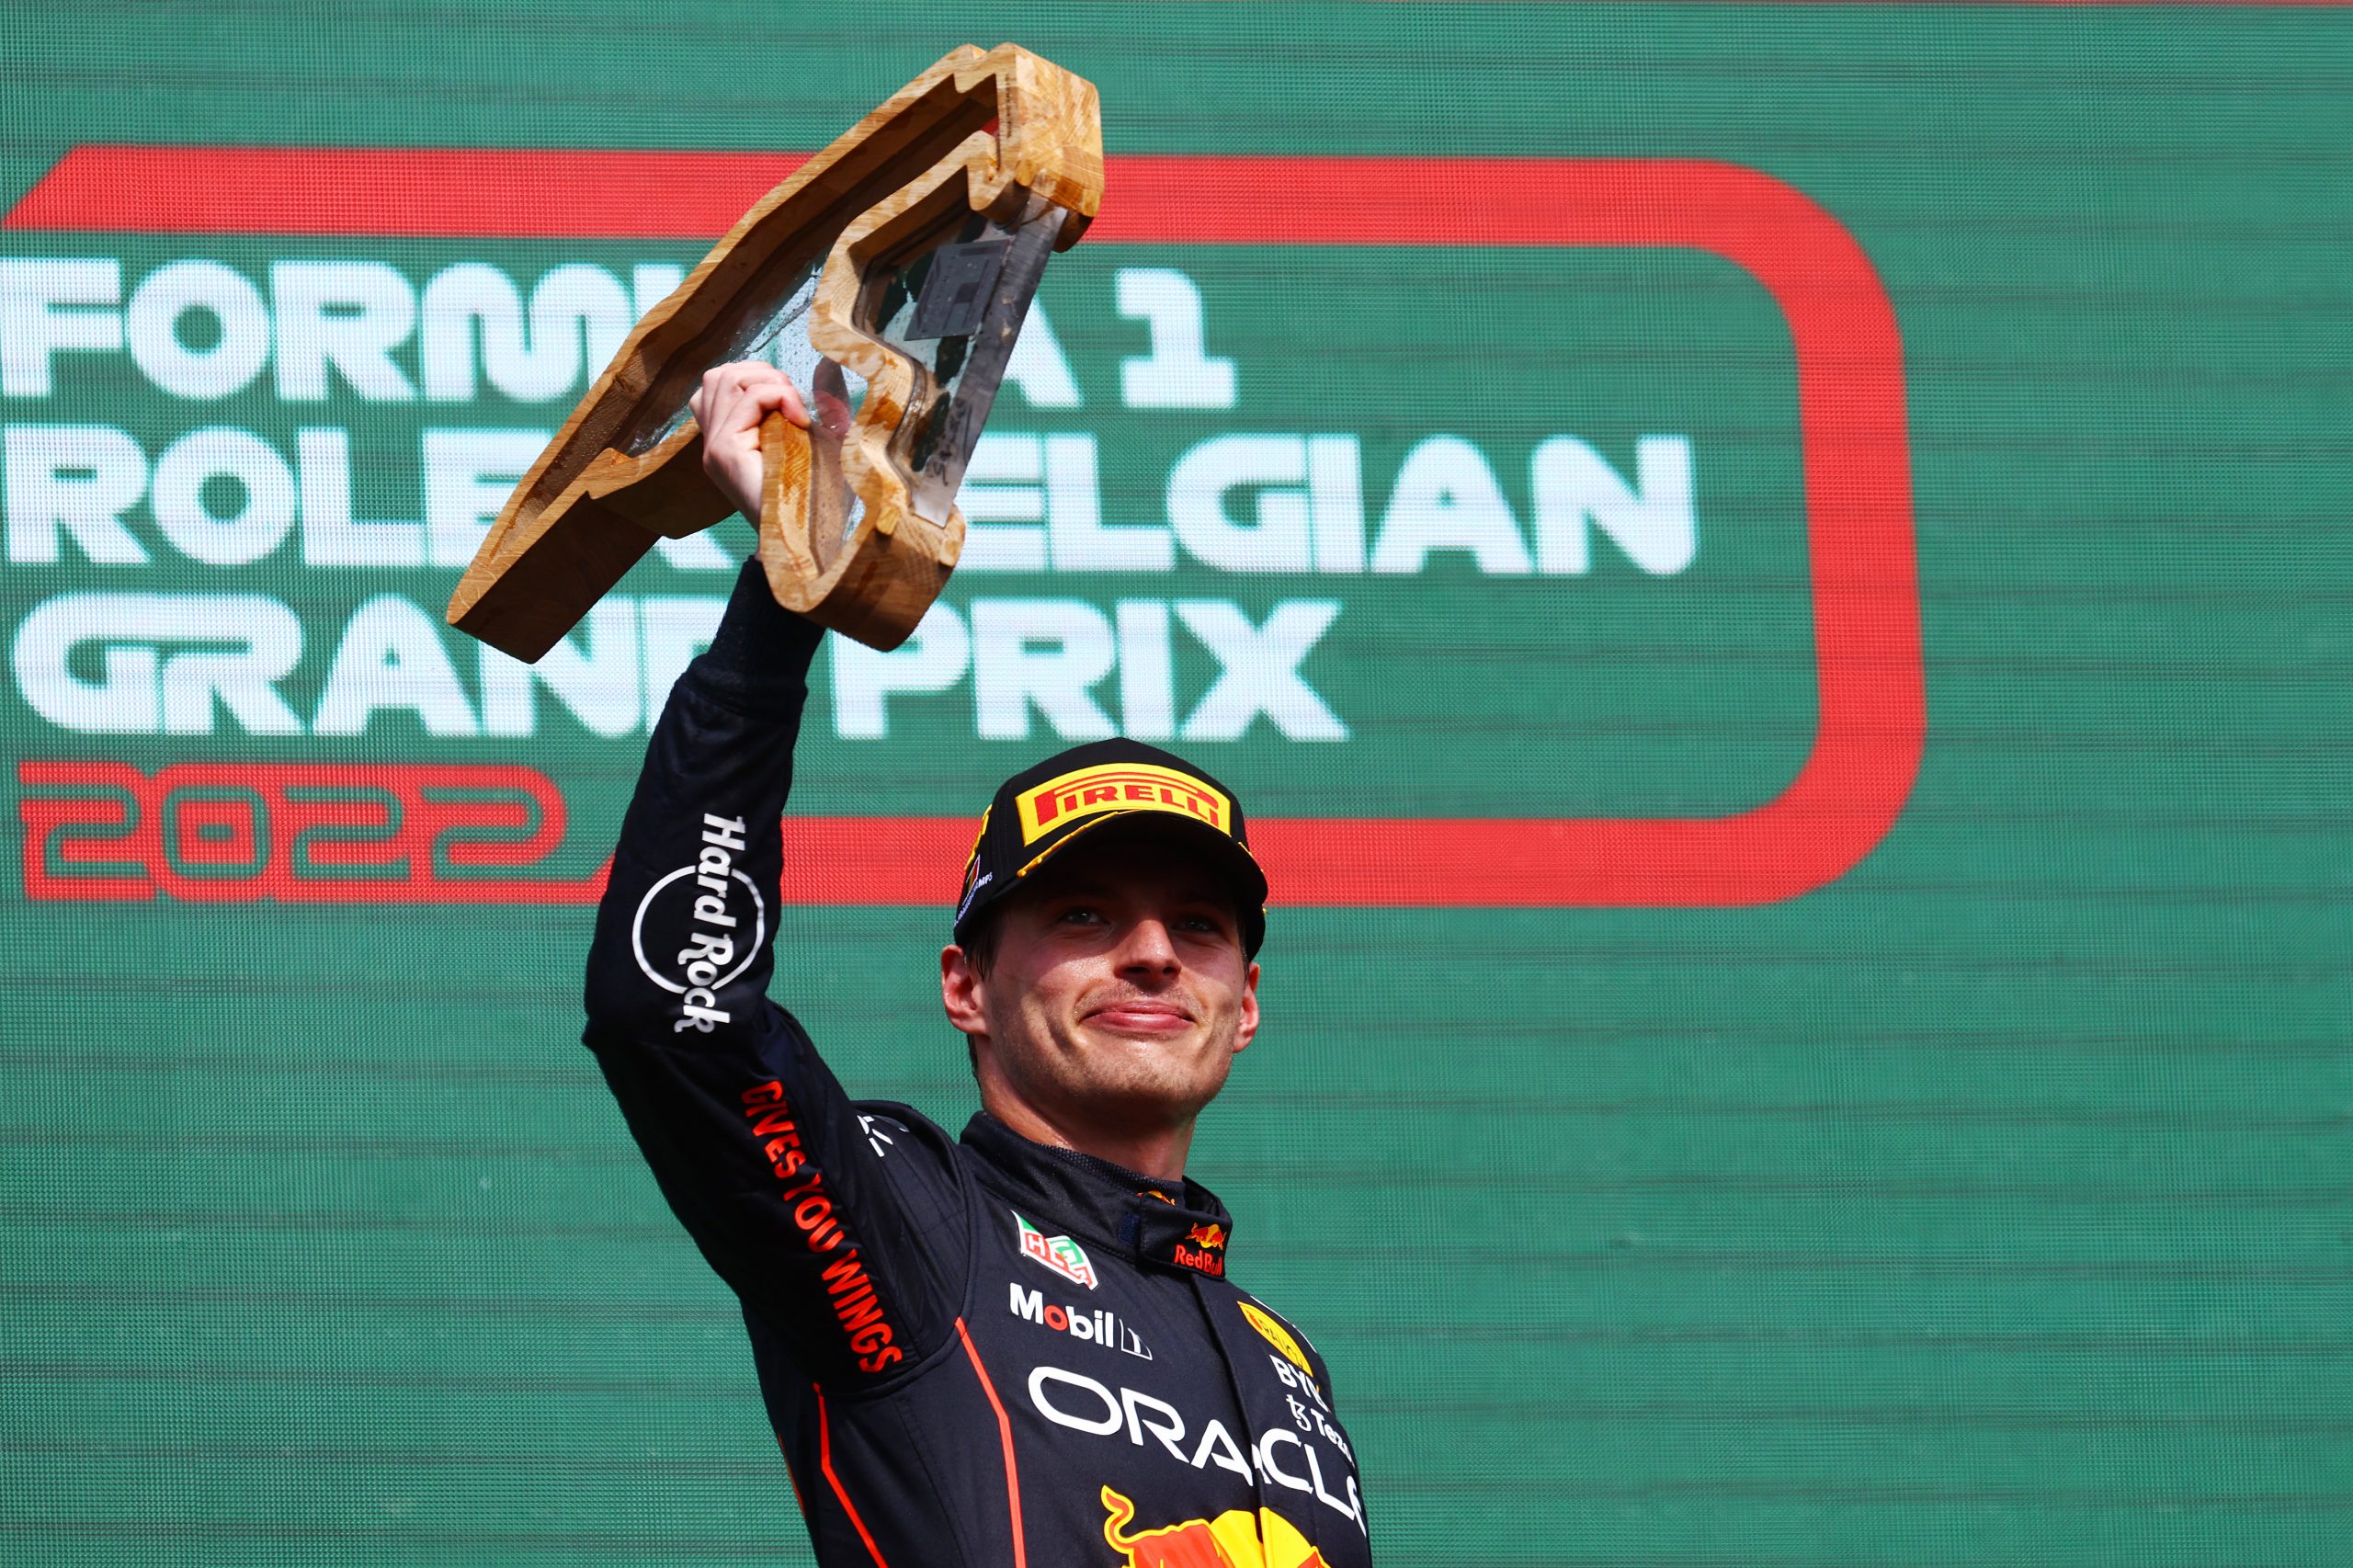 Belgian Grand Prix - Red Bull Racing's Max Verstappen lifts a trophy in the air, celebrating his victory at the 2022 Belgian Grand Prix